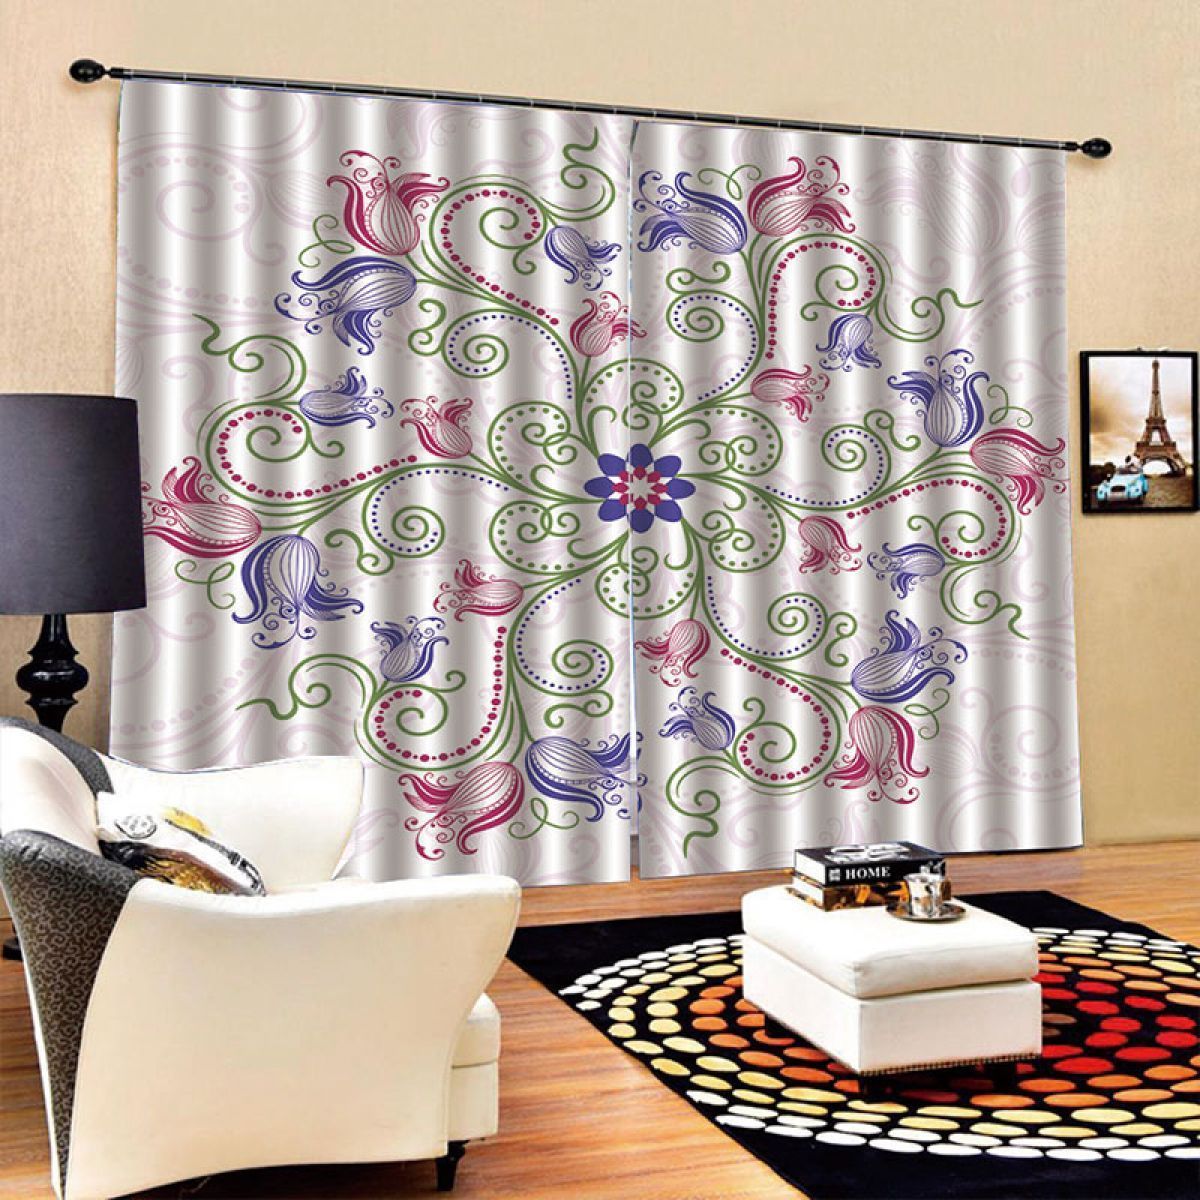 3d floral printed window curtain home decor 7721